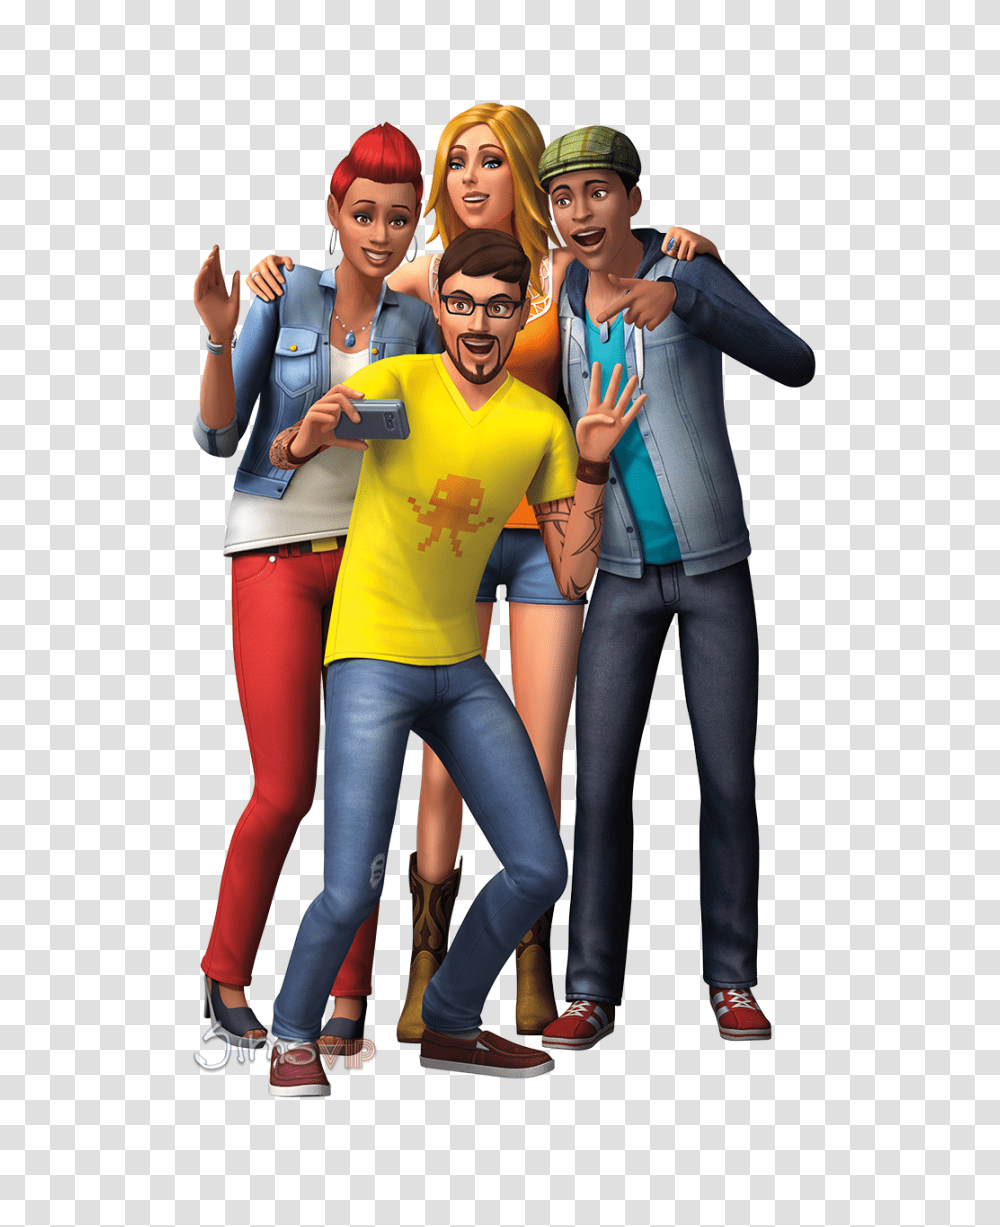 The Sims New Character Render Simsvip, Person, Poster, Advertisement Transparent Png